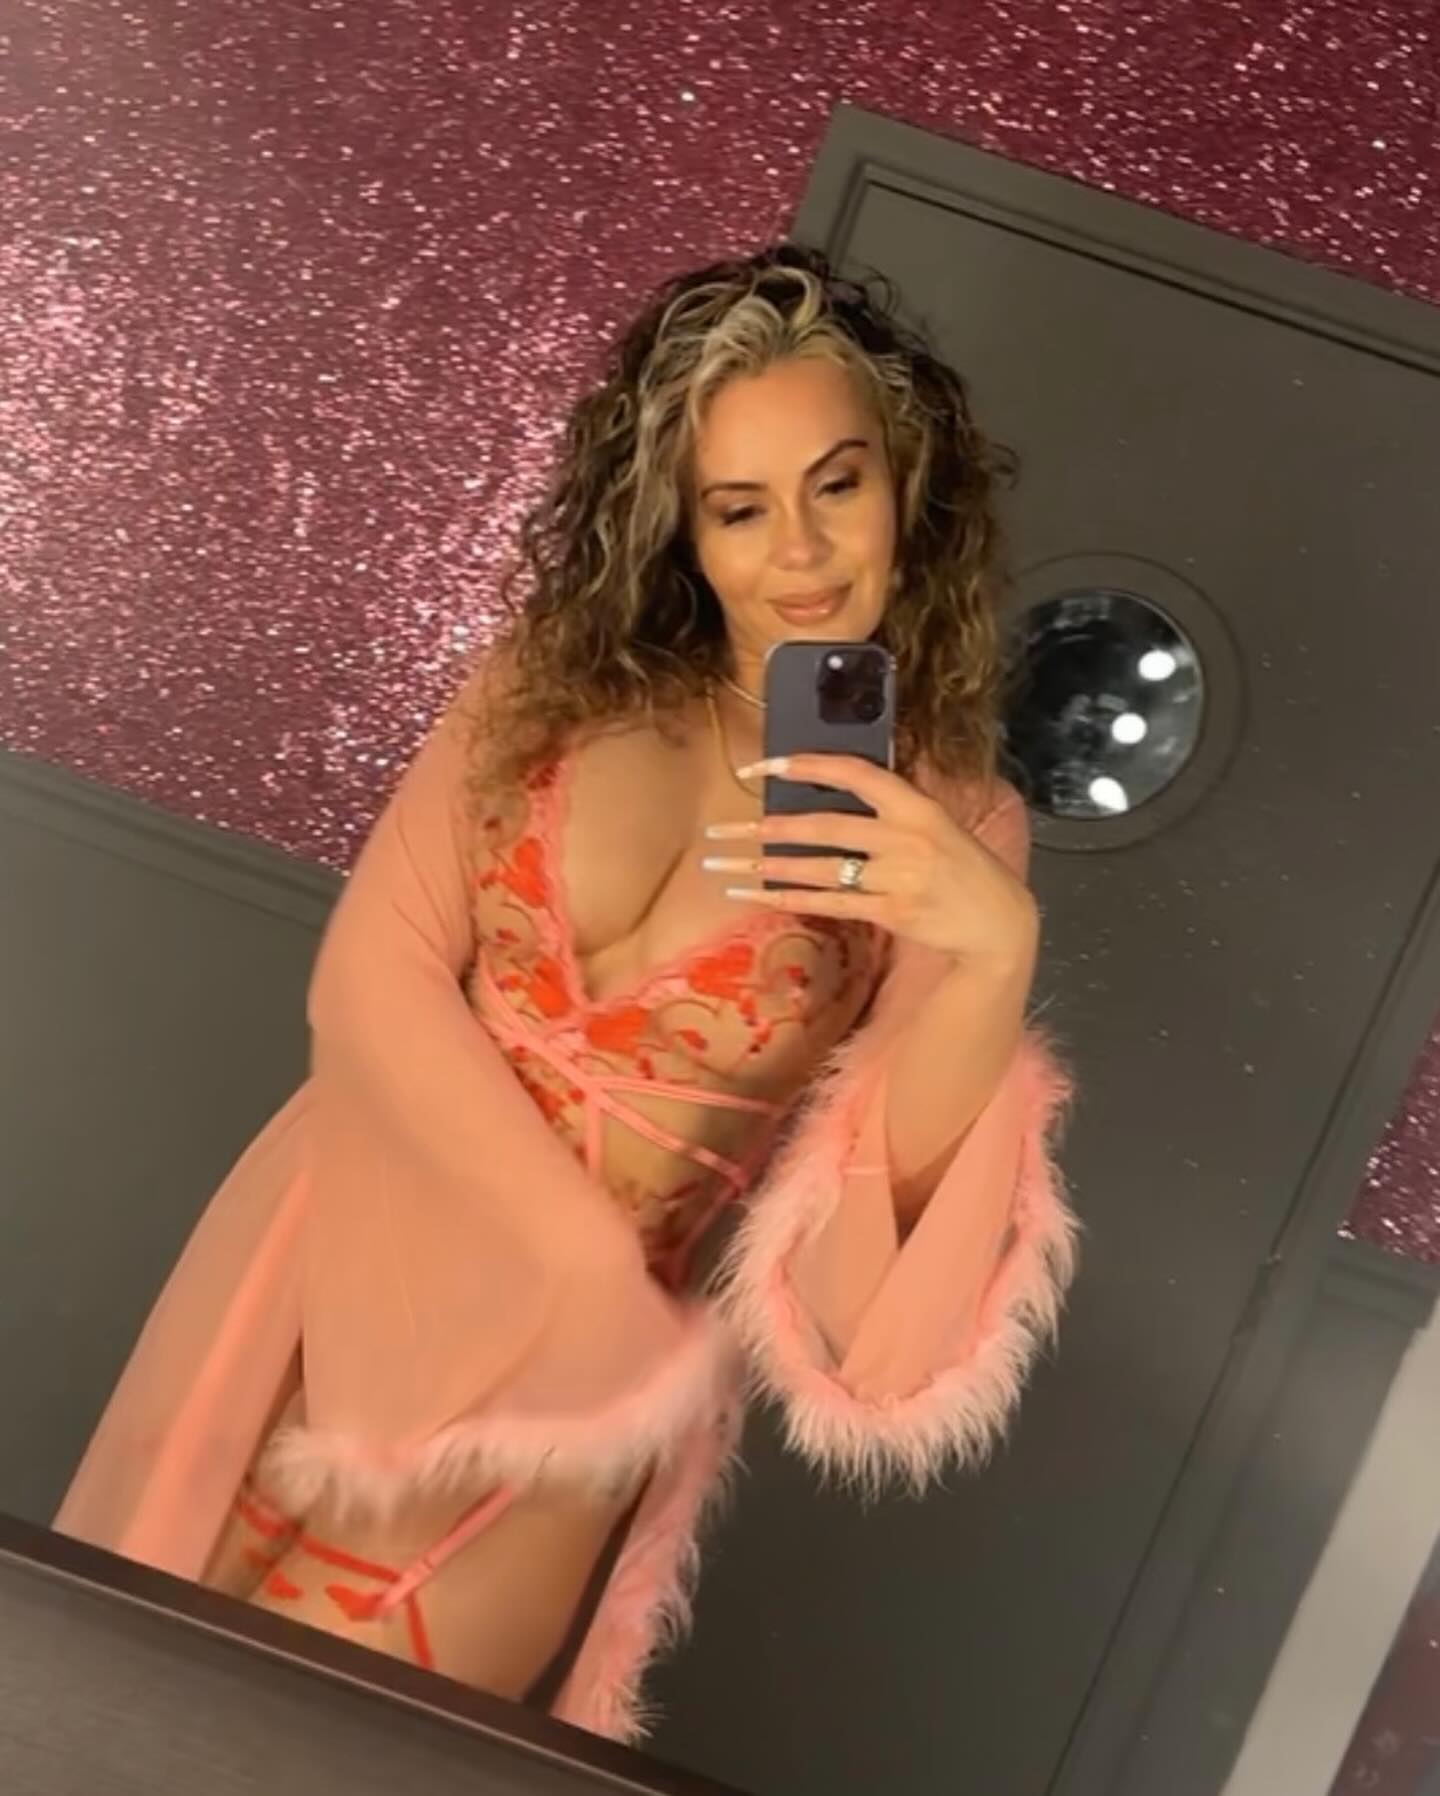 ‘What do you wear for bed?’ 

‘Why, Chanel No5 of course’

#pink #robe #drama #happygirl #girlie #nofilter #noedit #explorepage #leeds #manchester #miltonkeynes #london